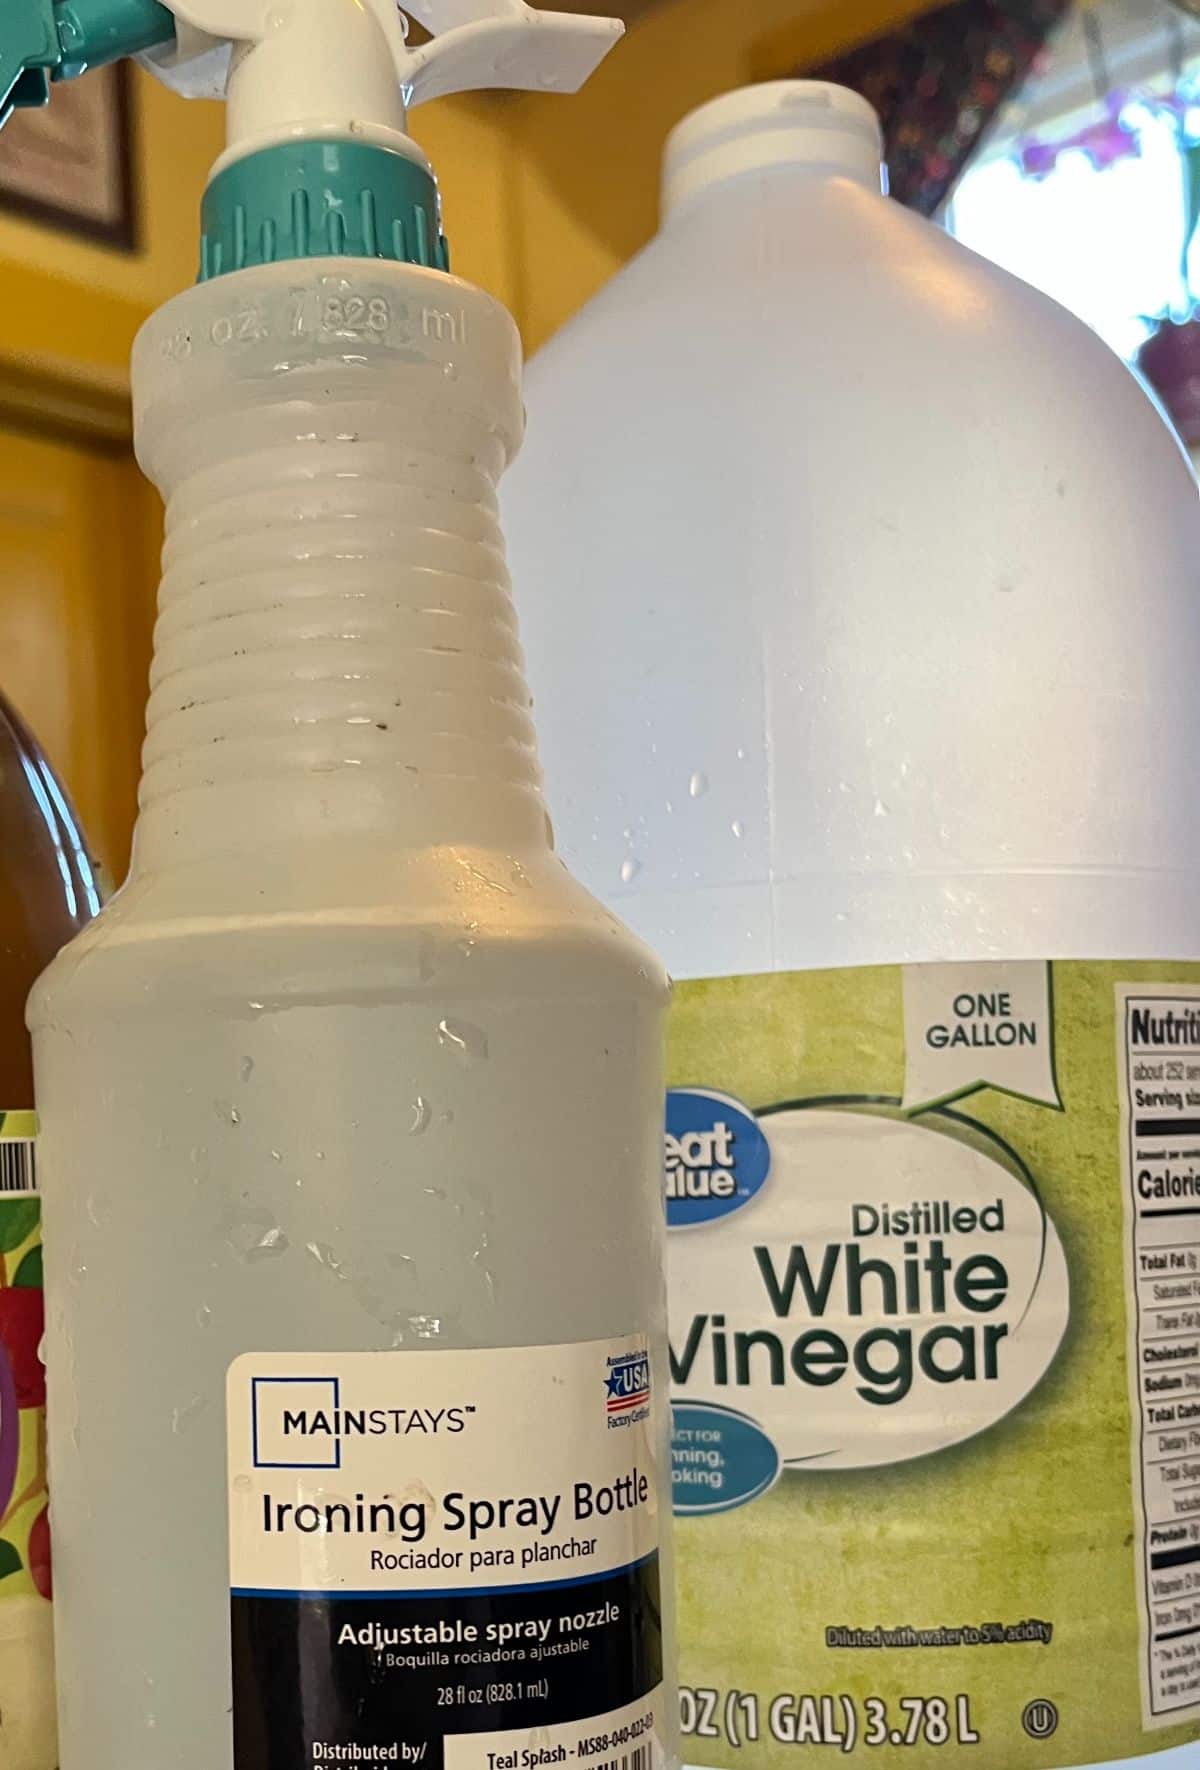 A small spray bottle next to a bottle of normal distilled white vinegar